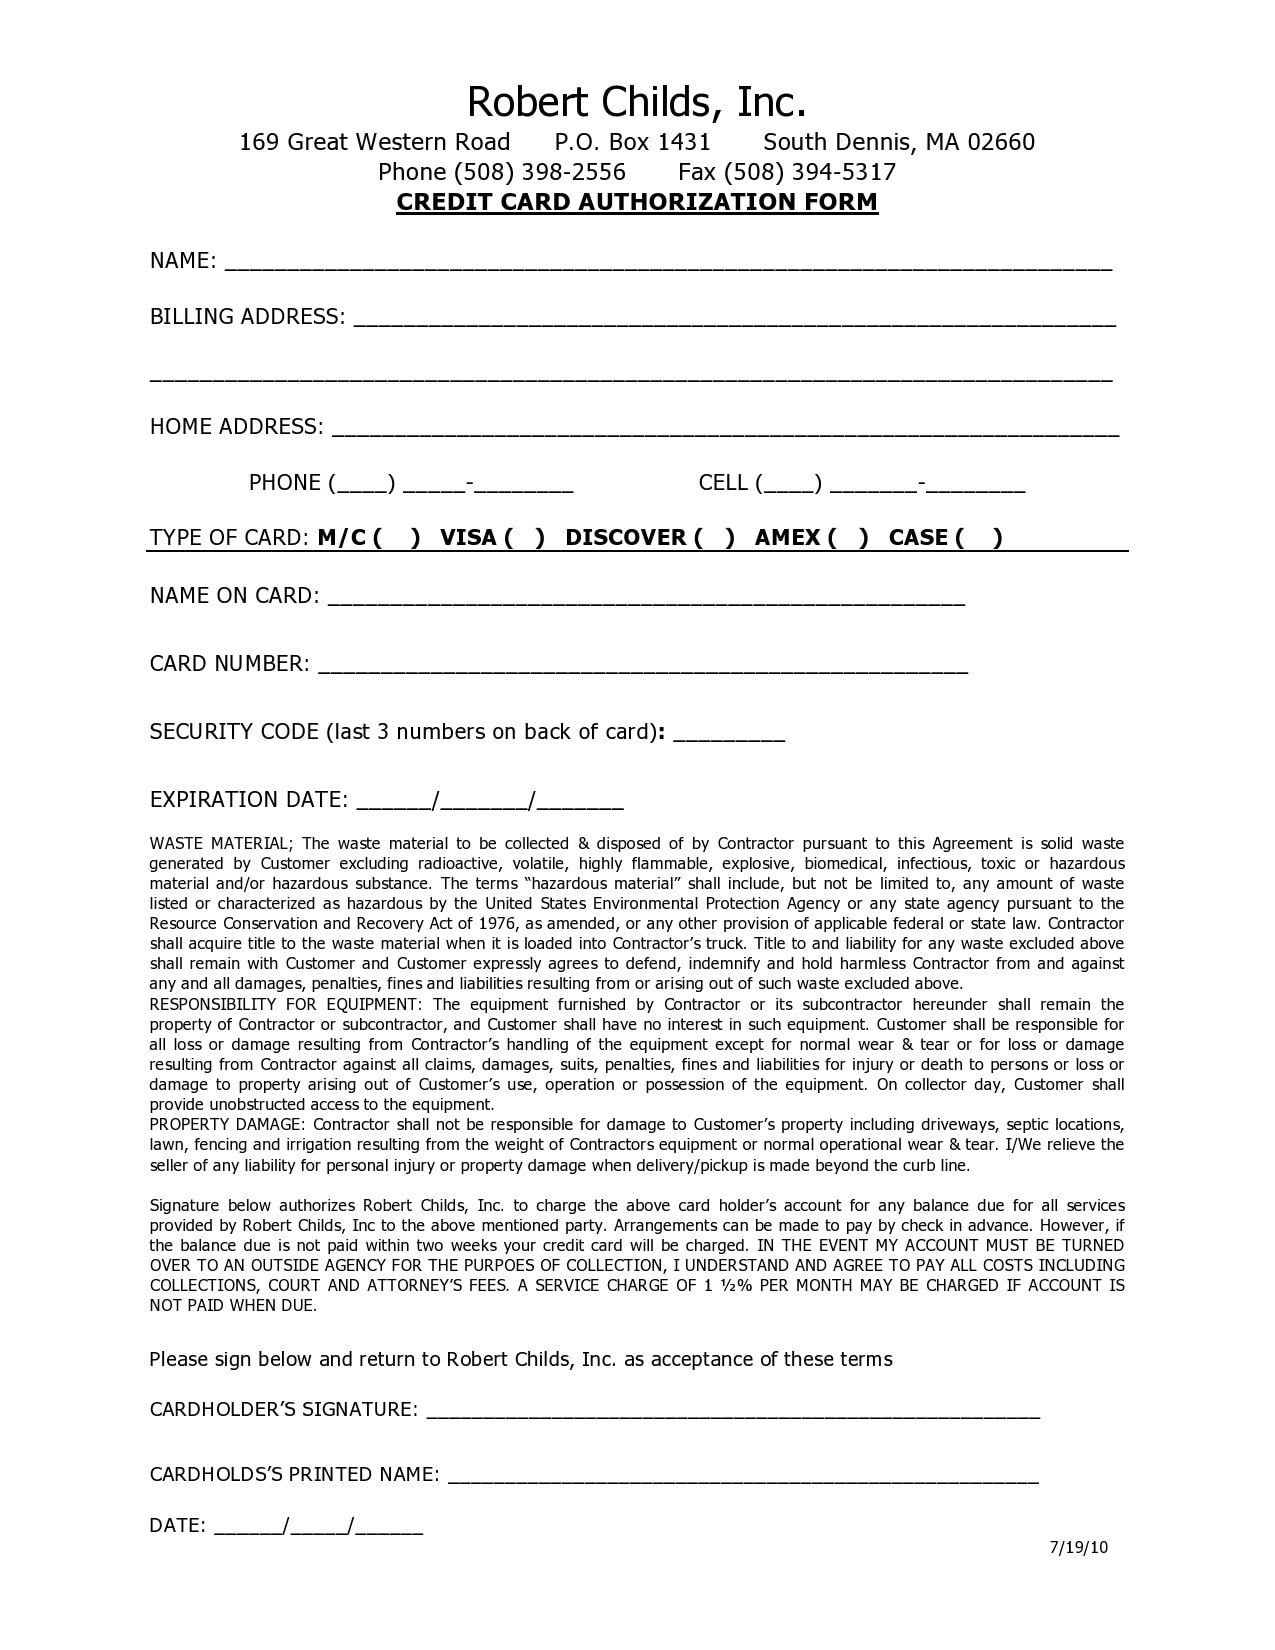 credit card authorization form template 19